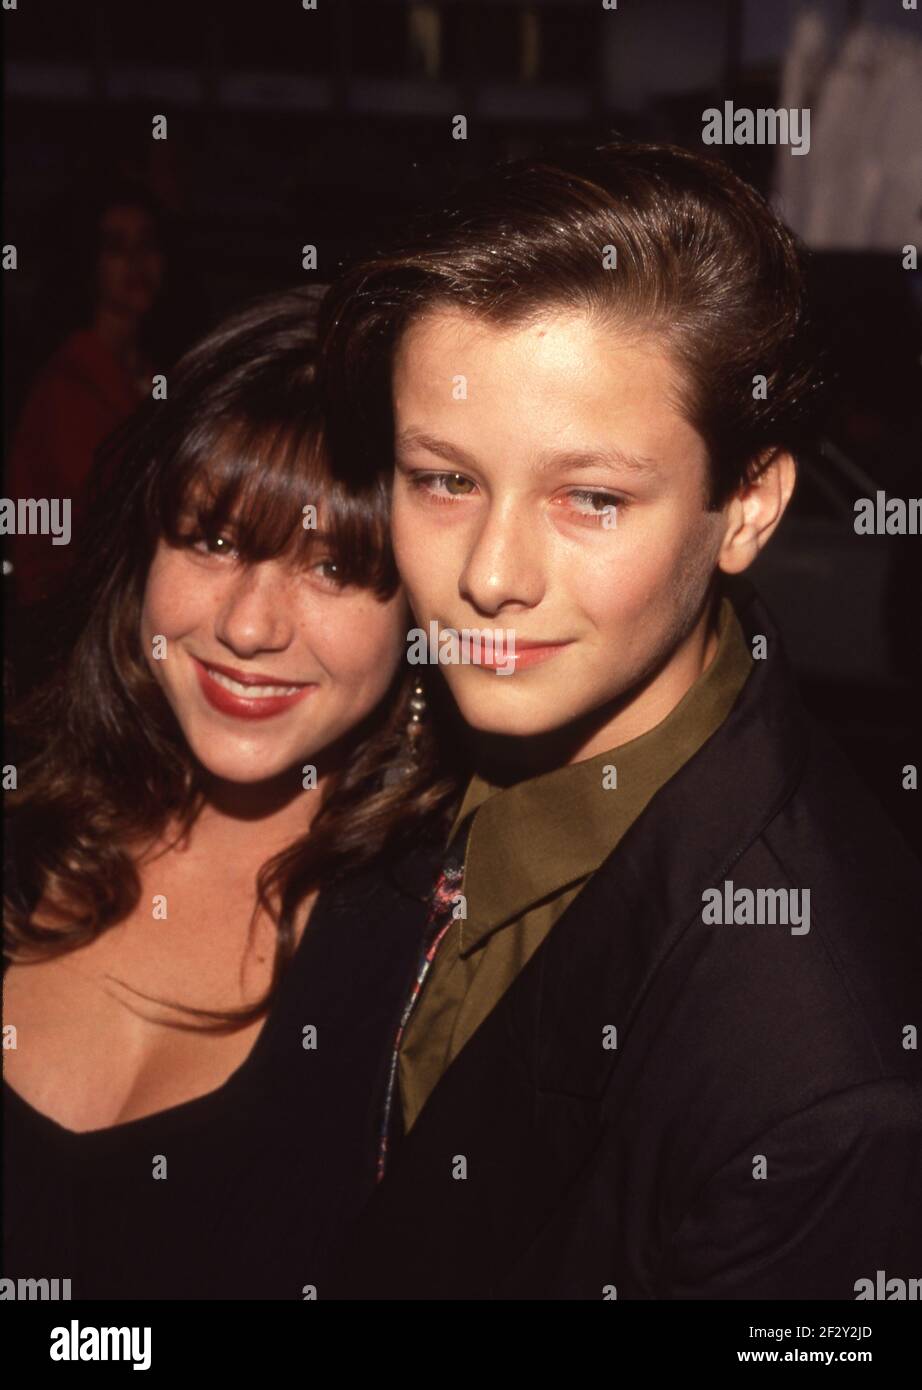 CENTURY CITY, CA - JULY 1: Actress Soleil Moon Frye and actor Edward Furlong attend the 'Terminator 2: Judgment Day' Century City Premiere on July 1, 1991 at Cineplex Odeon Century Plaza Cinemas in Century City, California.  Credit: Ralph Dominguez/MediaPunch Stock Photo